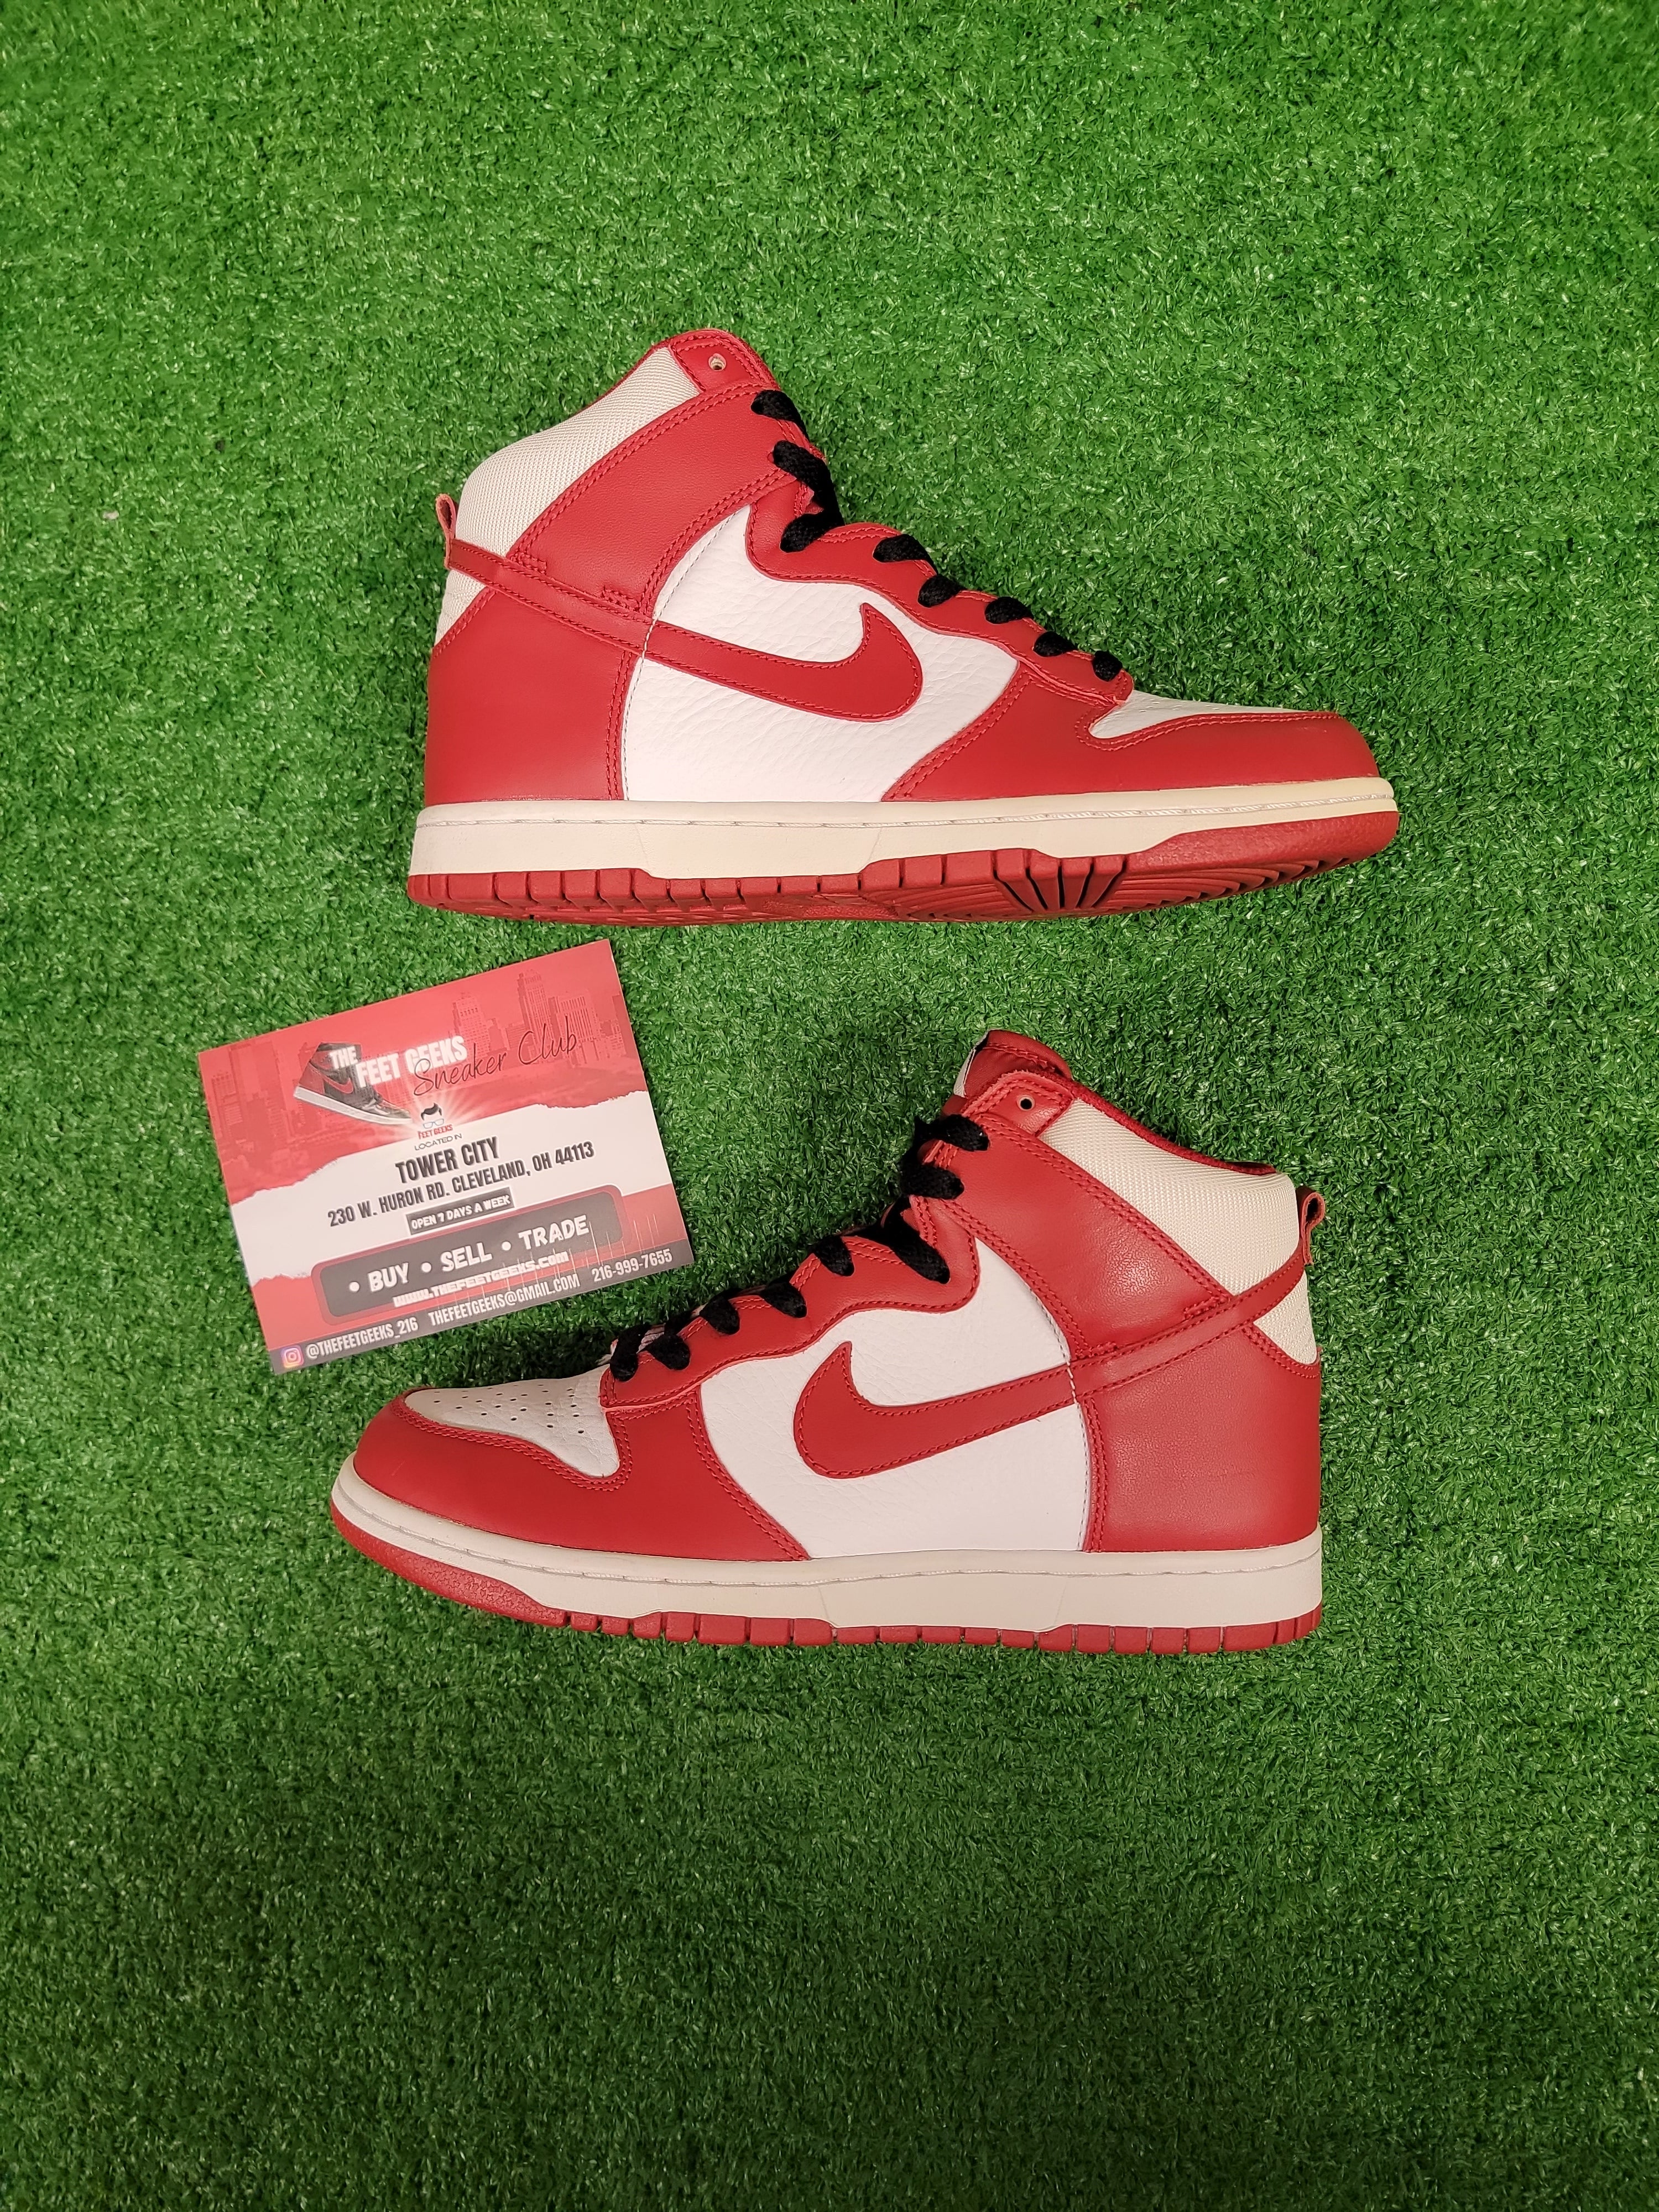 Pre Owned Nike Dunk High 2009 University Red size 8